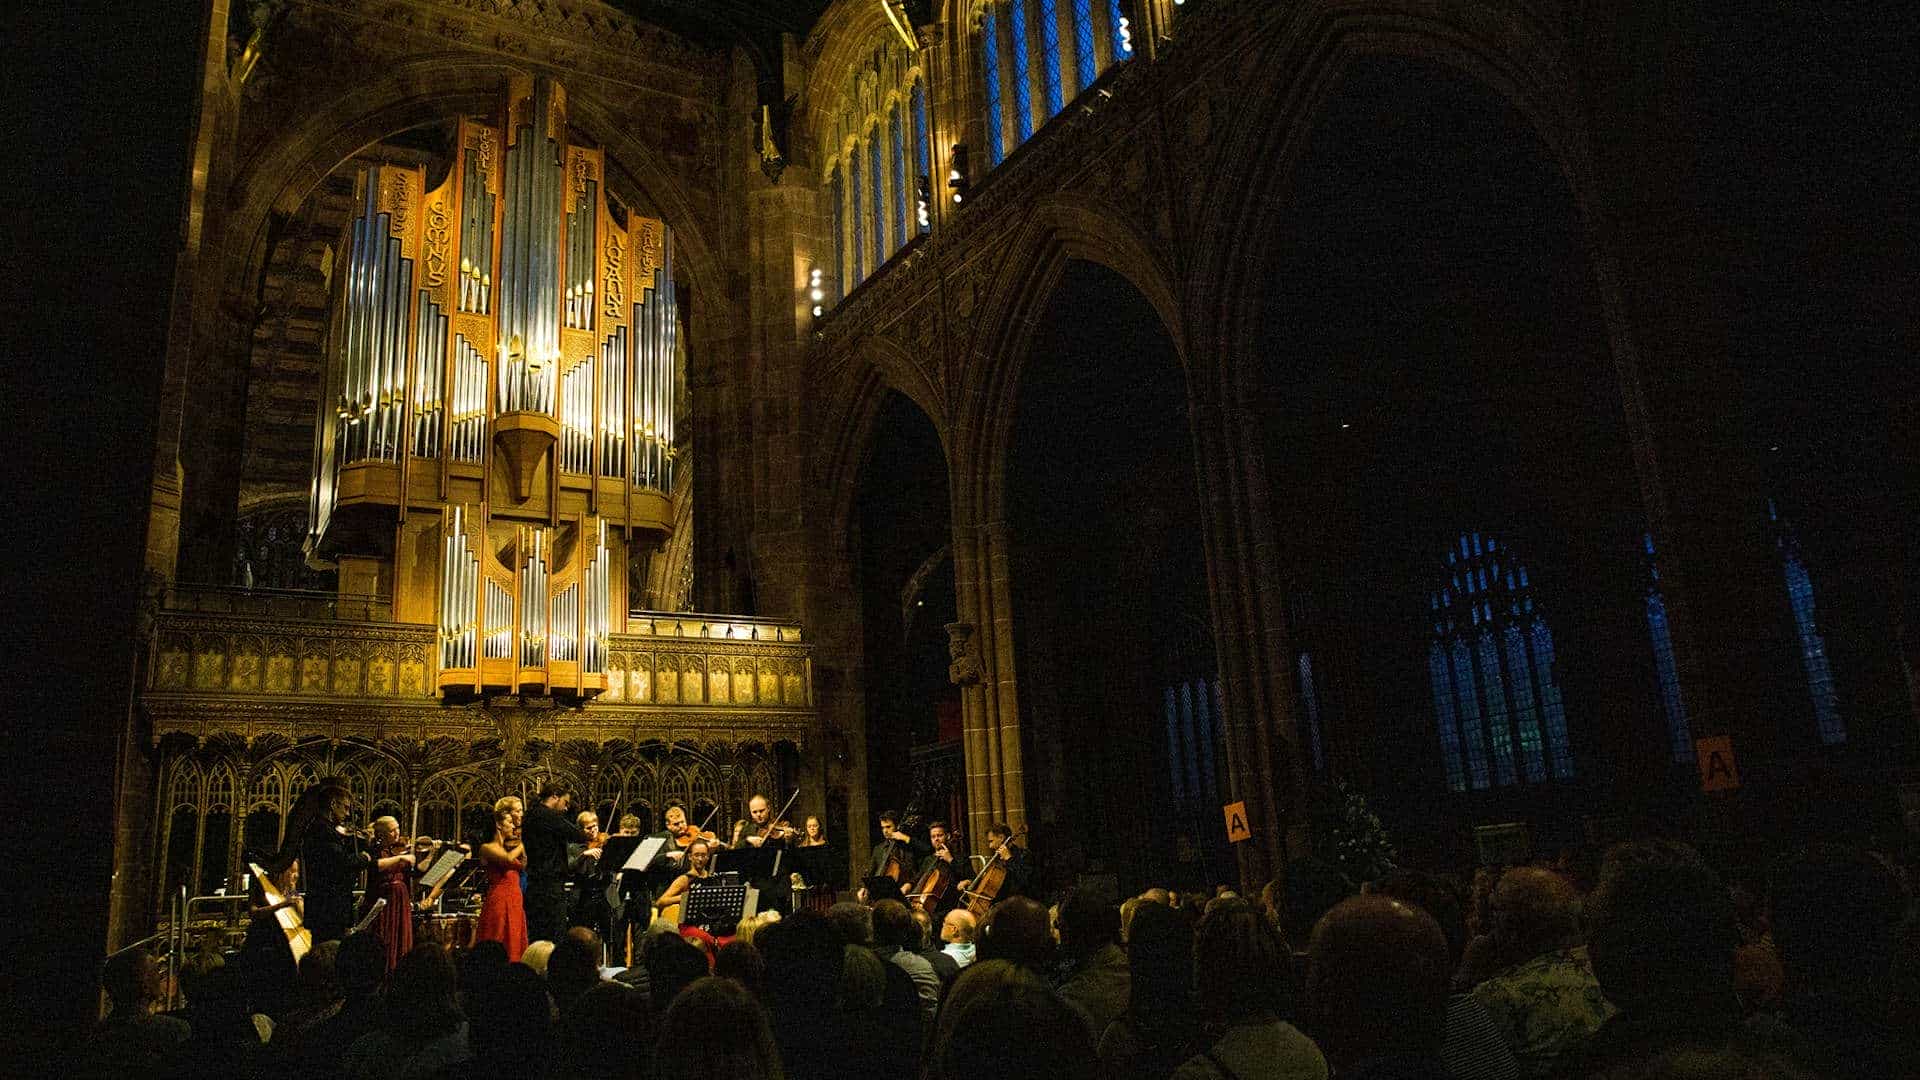 London Concertante - Vivaldi's Four Seasons by Candlelight